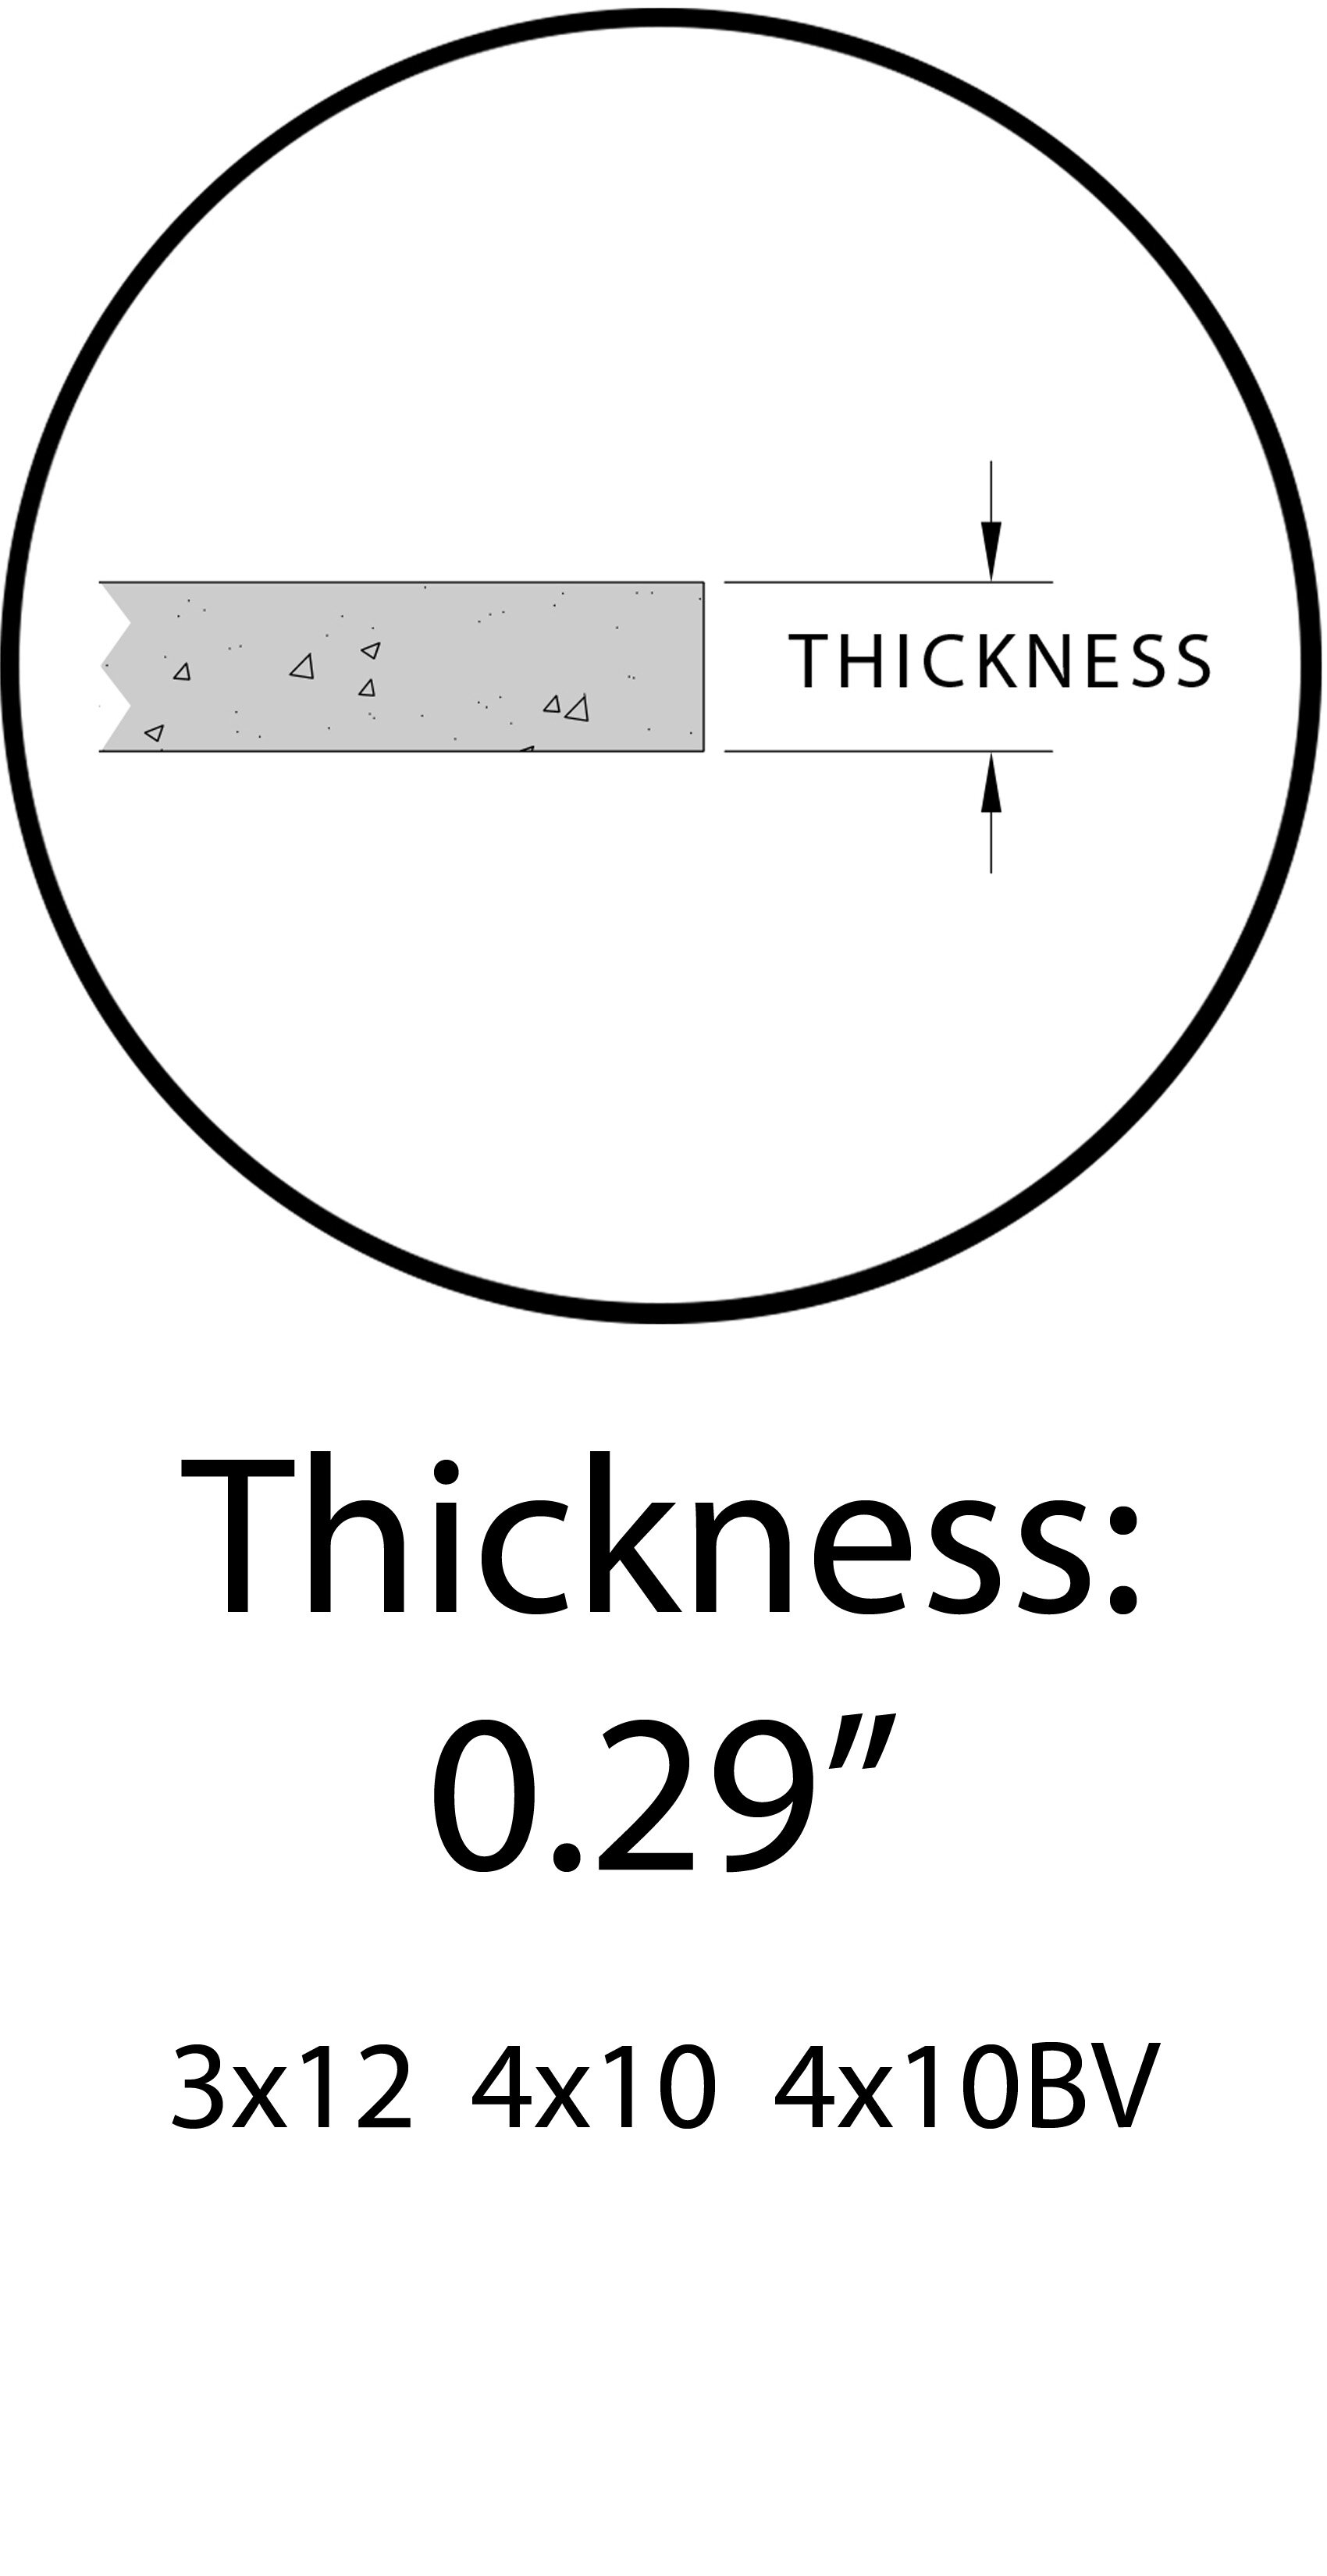 09 Thickness_0 point 29 inches.jpg